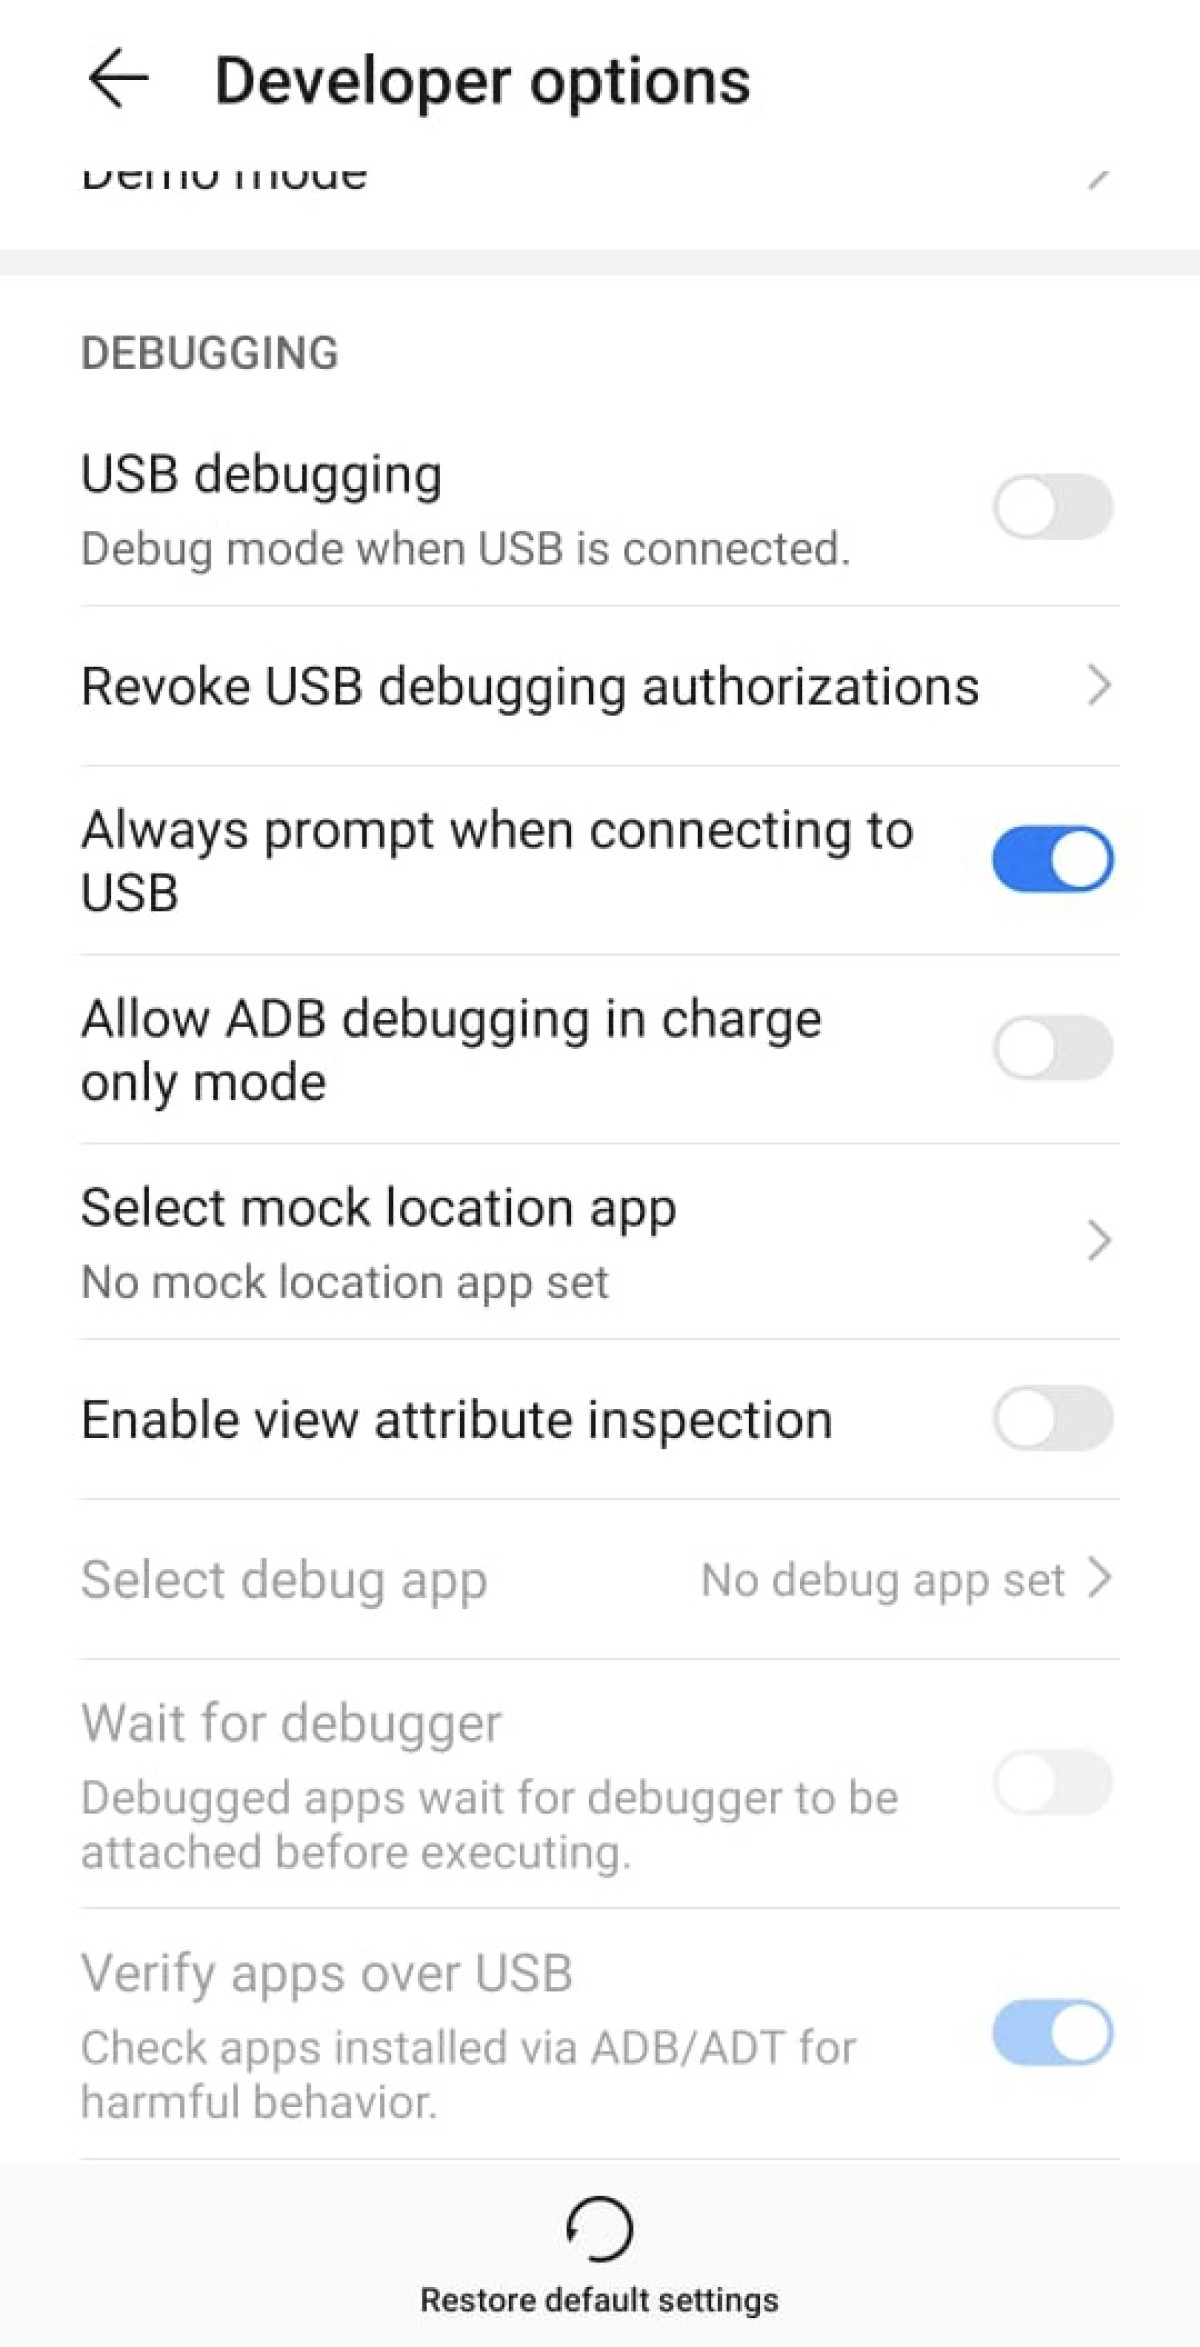 Developer options on an Android